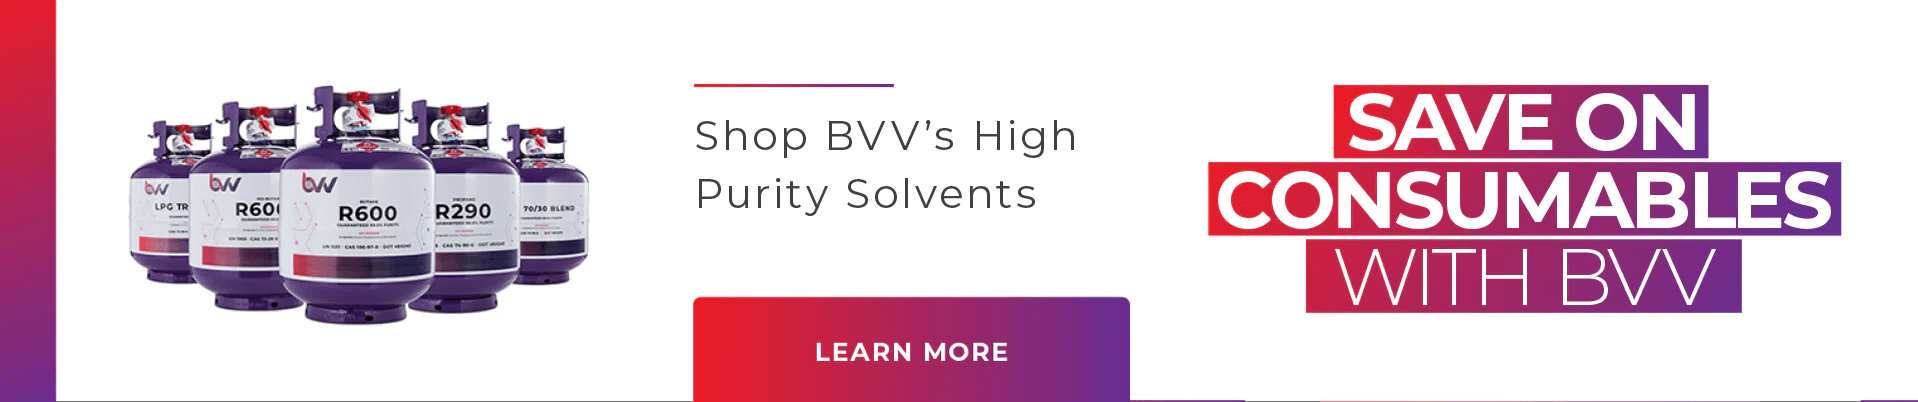 Bvv High Purity Solvents